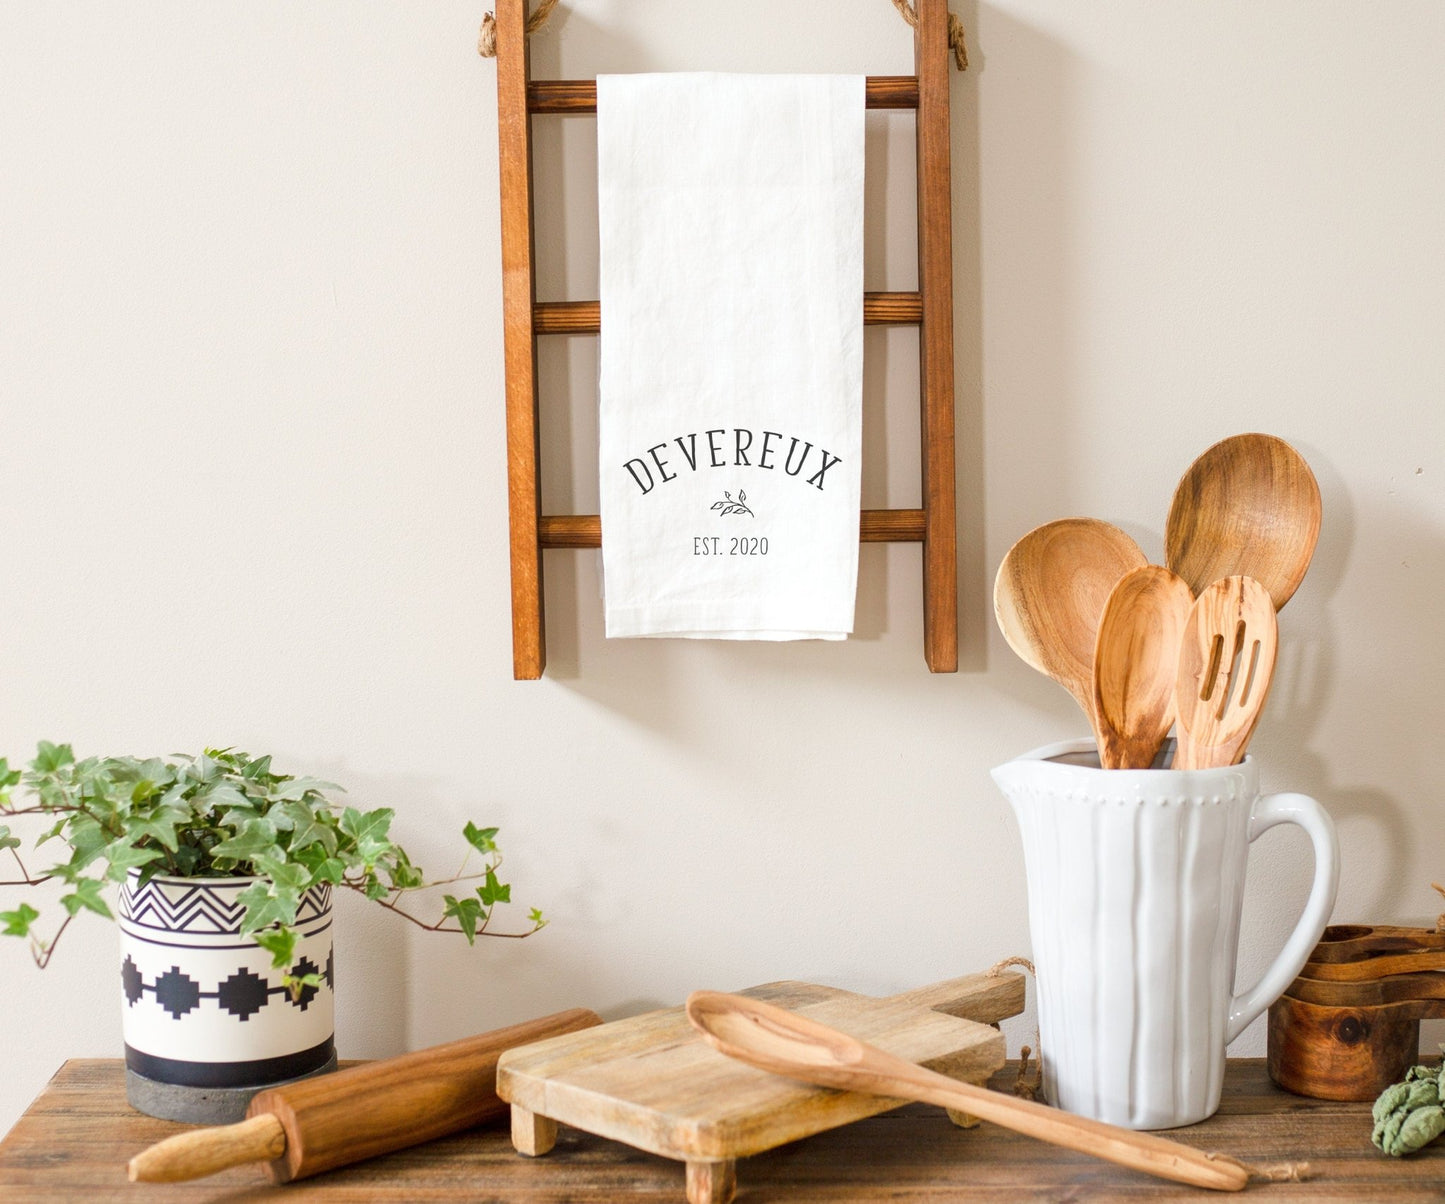 Load image into Gallery viewer, Housewarming Gift Idea | Personalized Family Name and Established Date Linen Tea Towel | Wedding Gift Idea | Personalized Bridal Shower Gift
